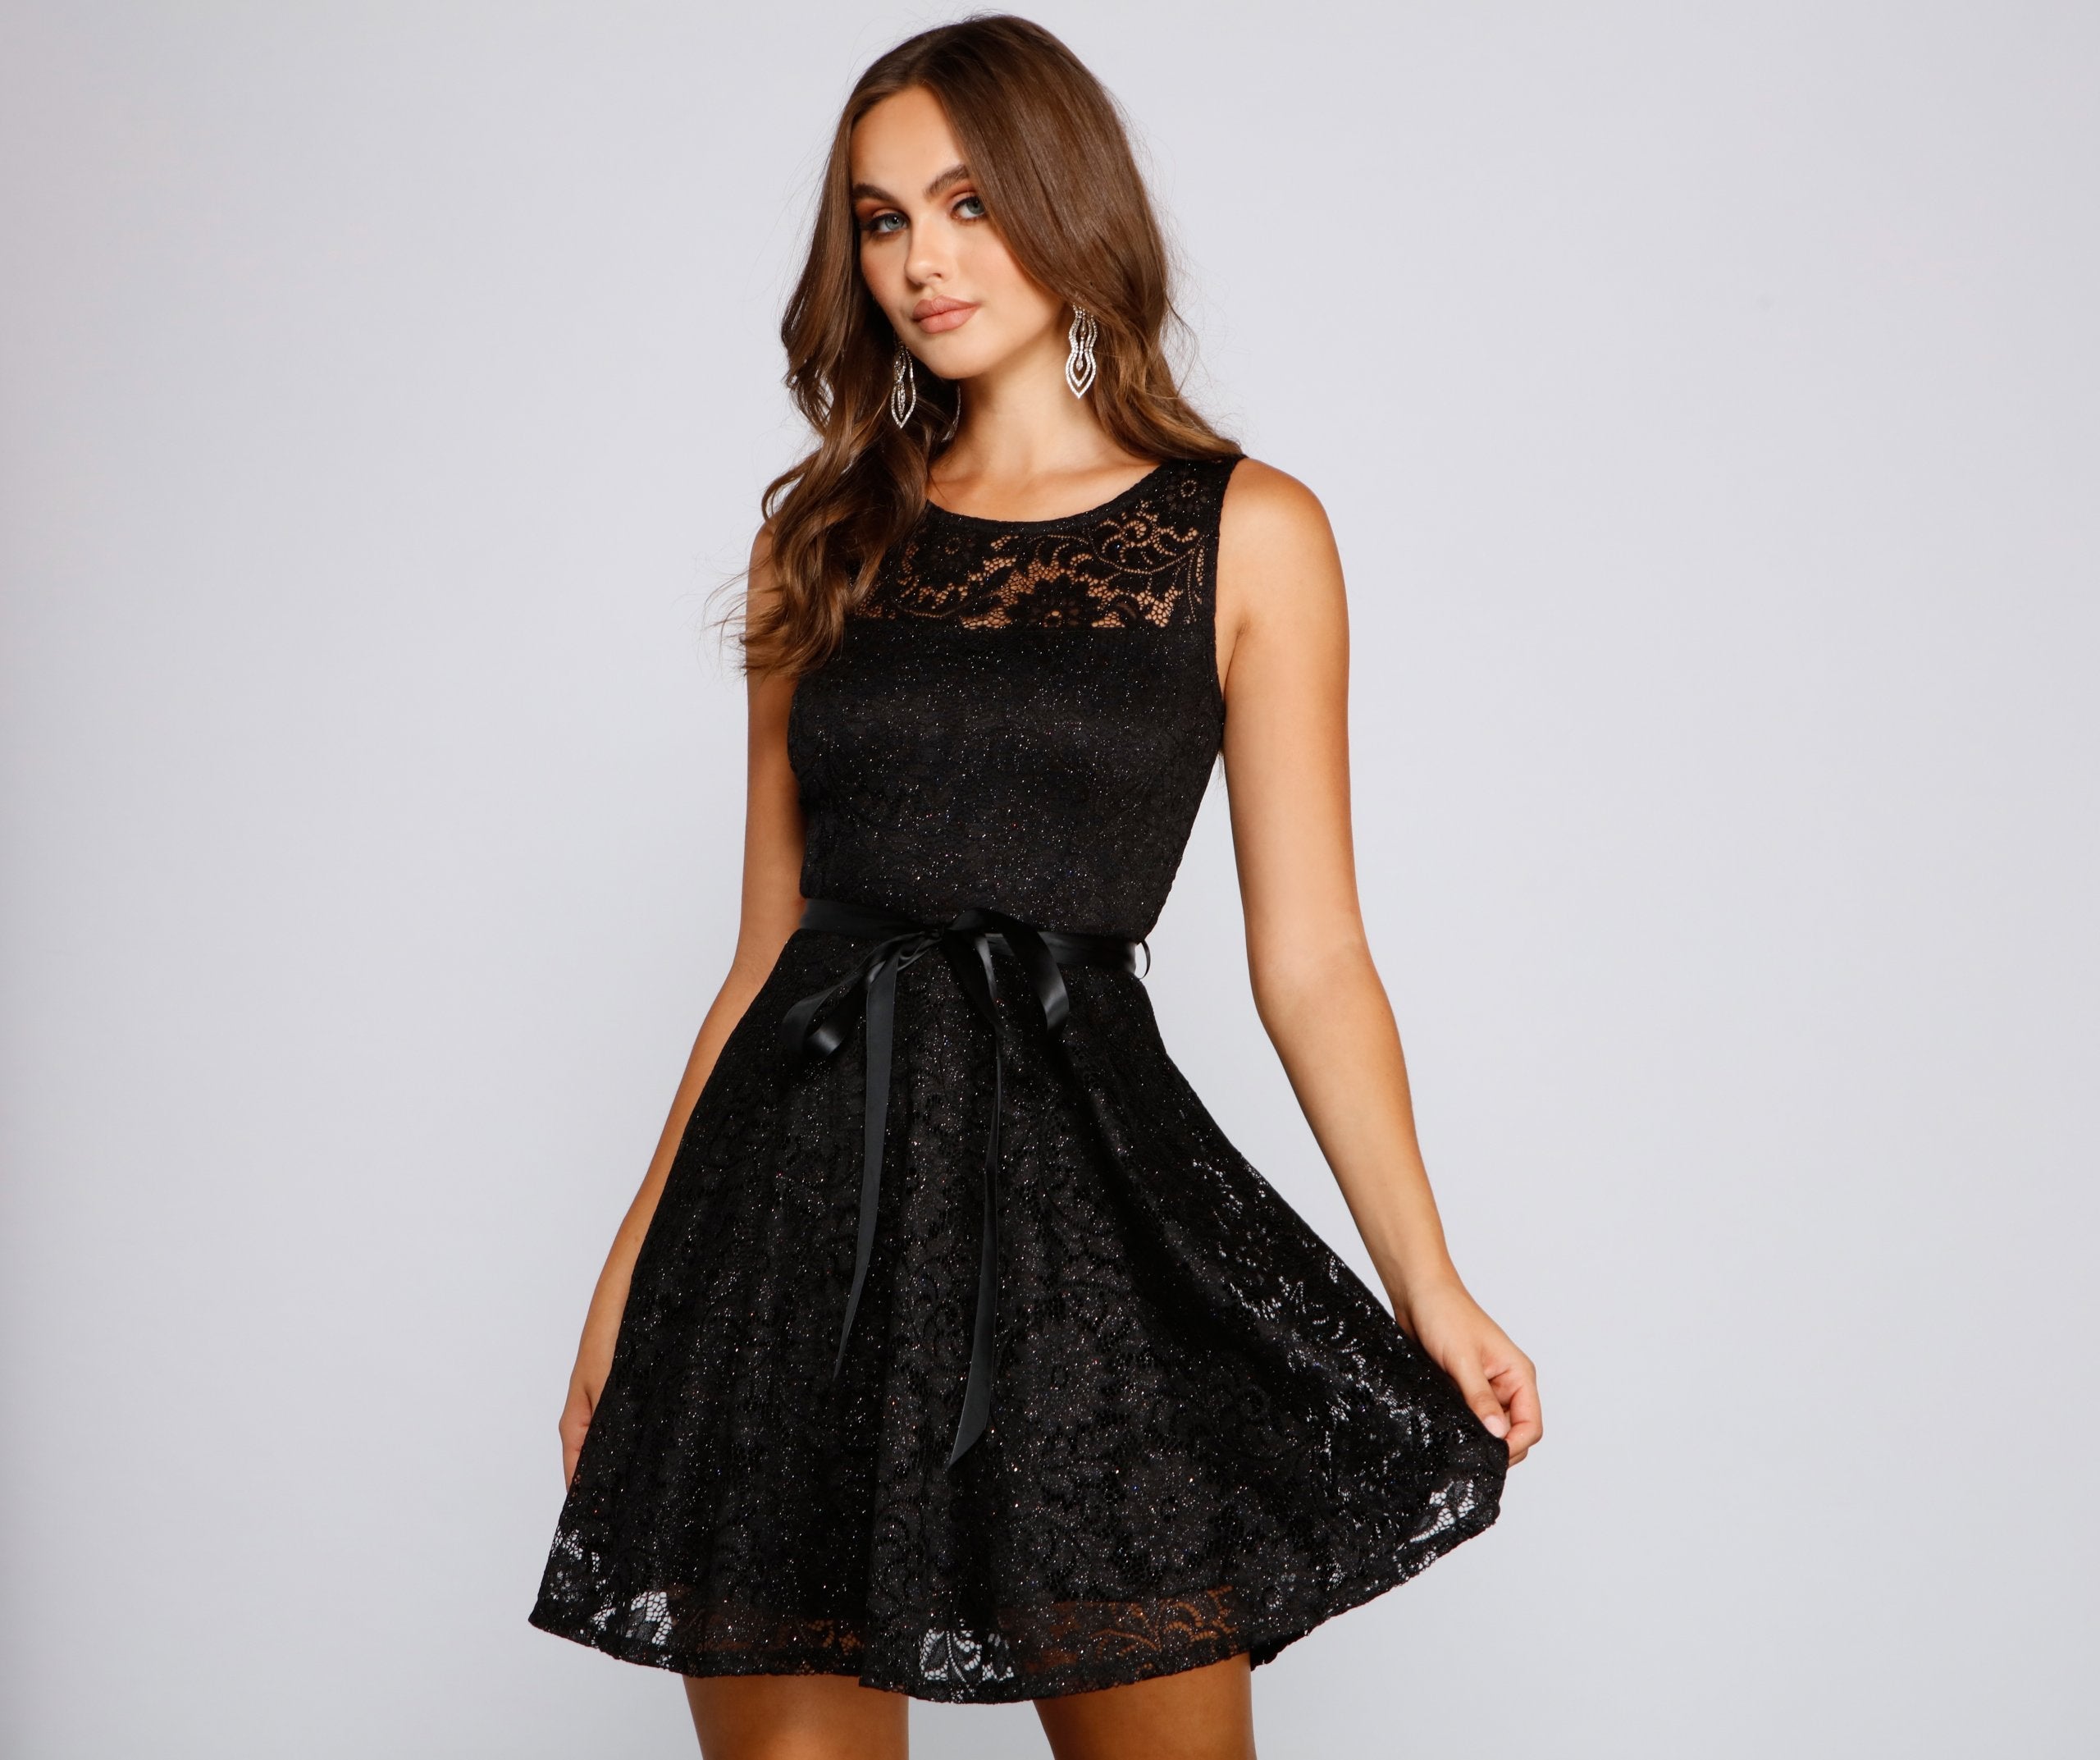 Violetta Formal Glitter And Lace Party Dress